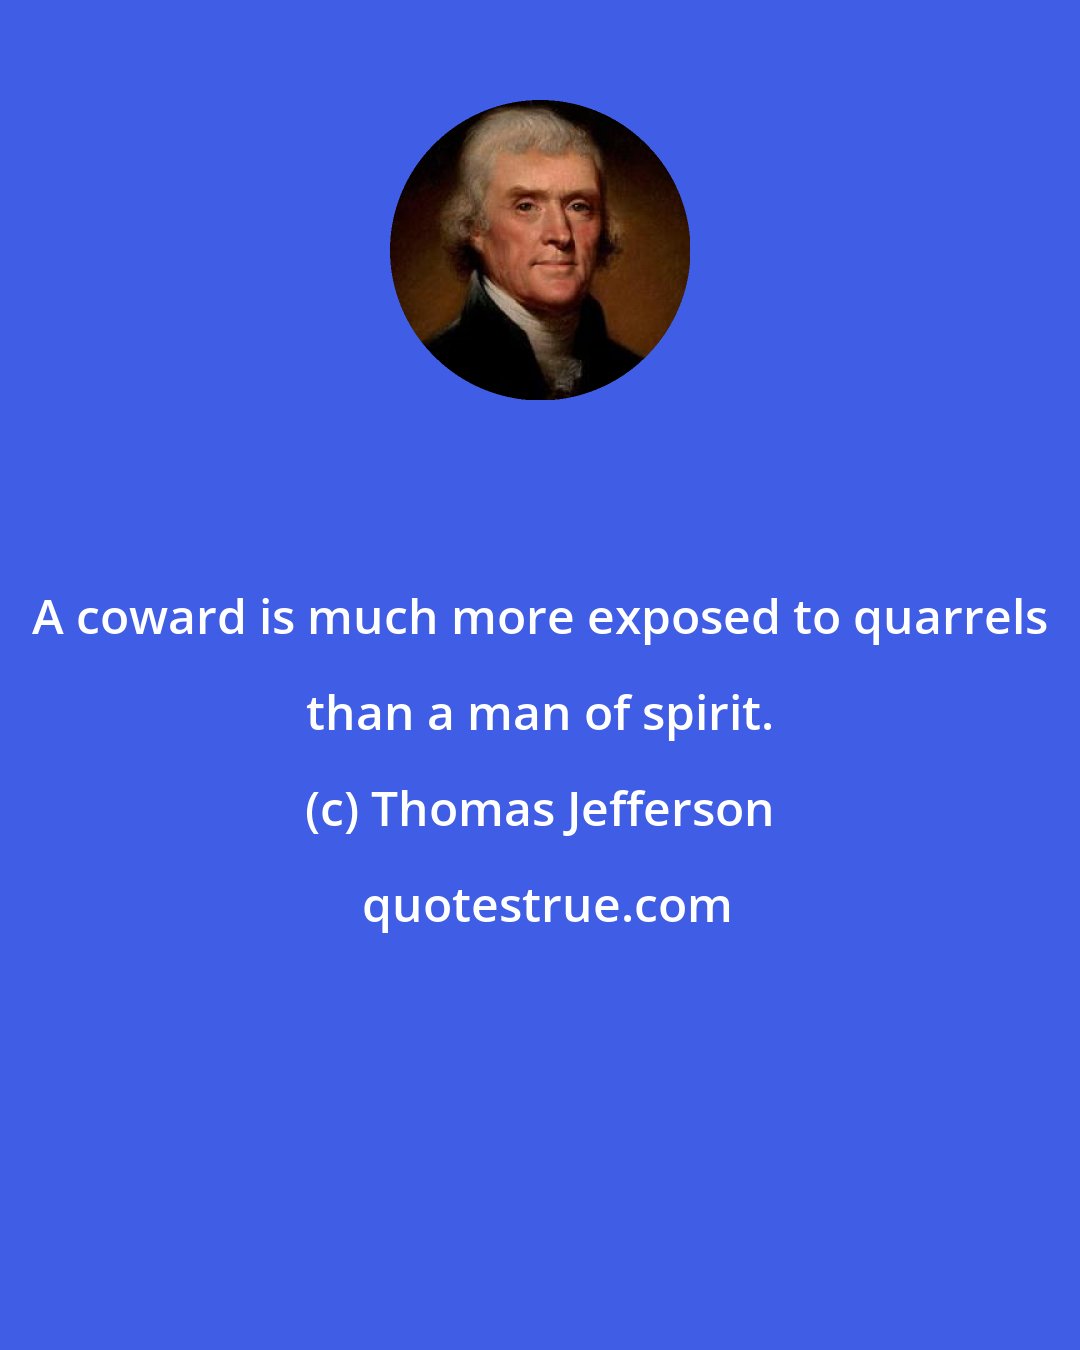 Thomas Jefferson: A coward is much more exposed to quarrels than a man of spirit.